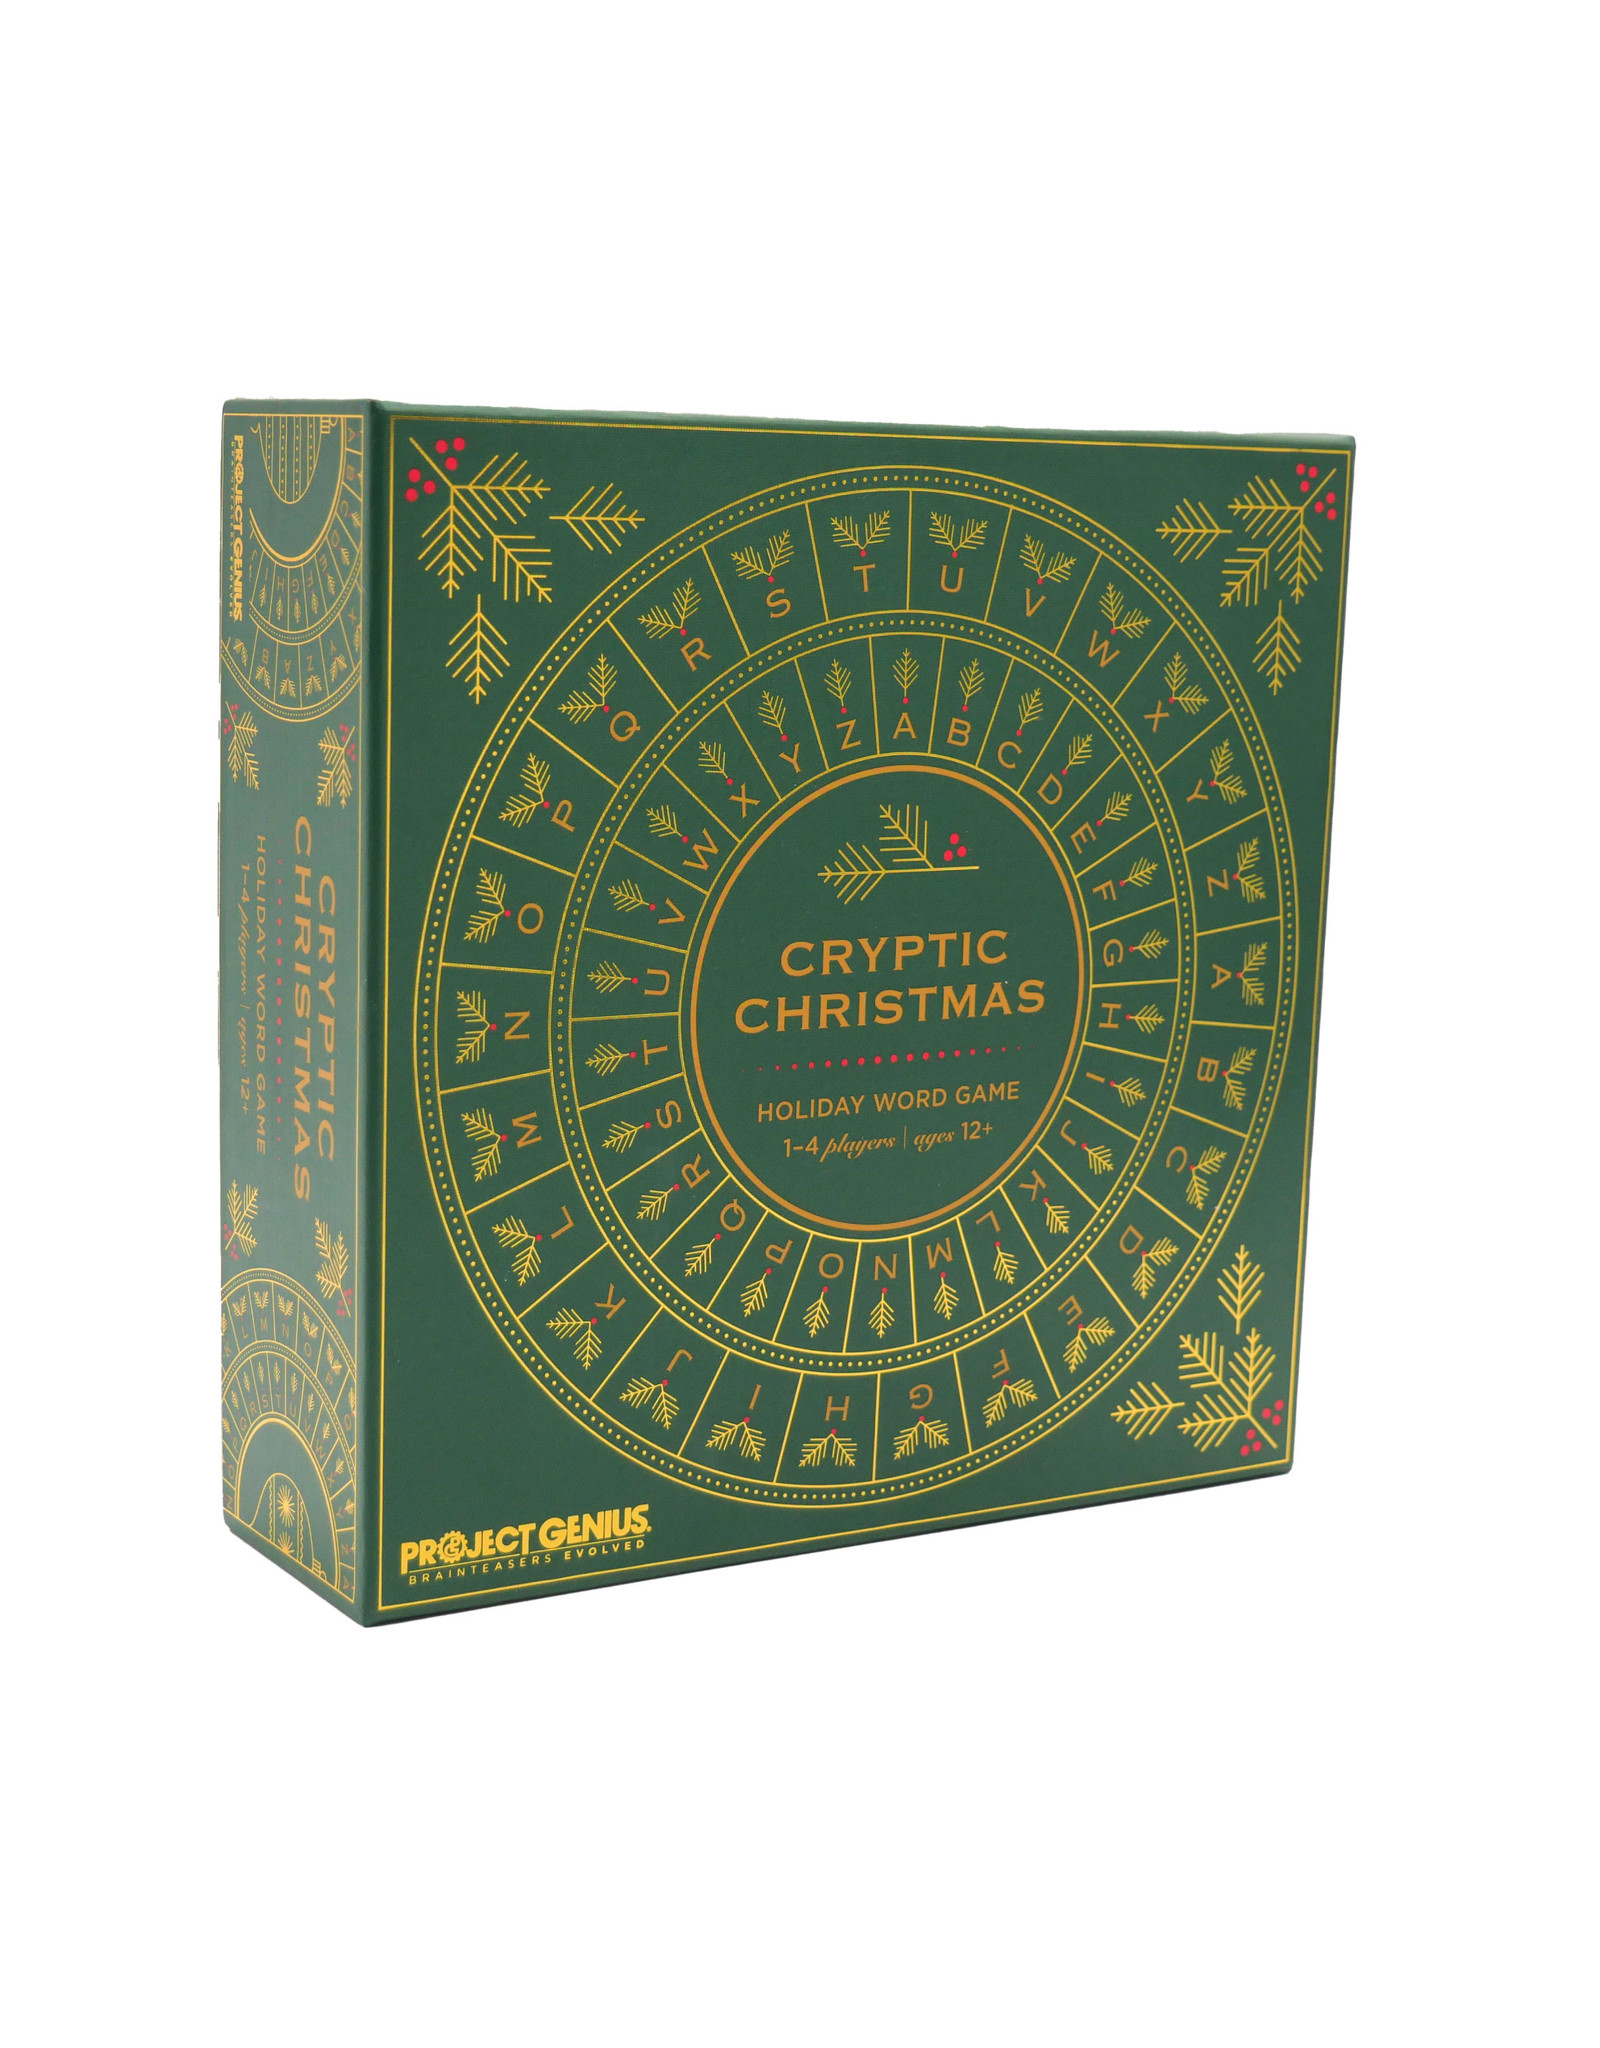 Project Genius Inc. Cryptic Christmas Game